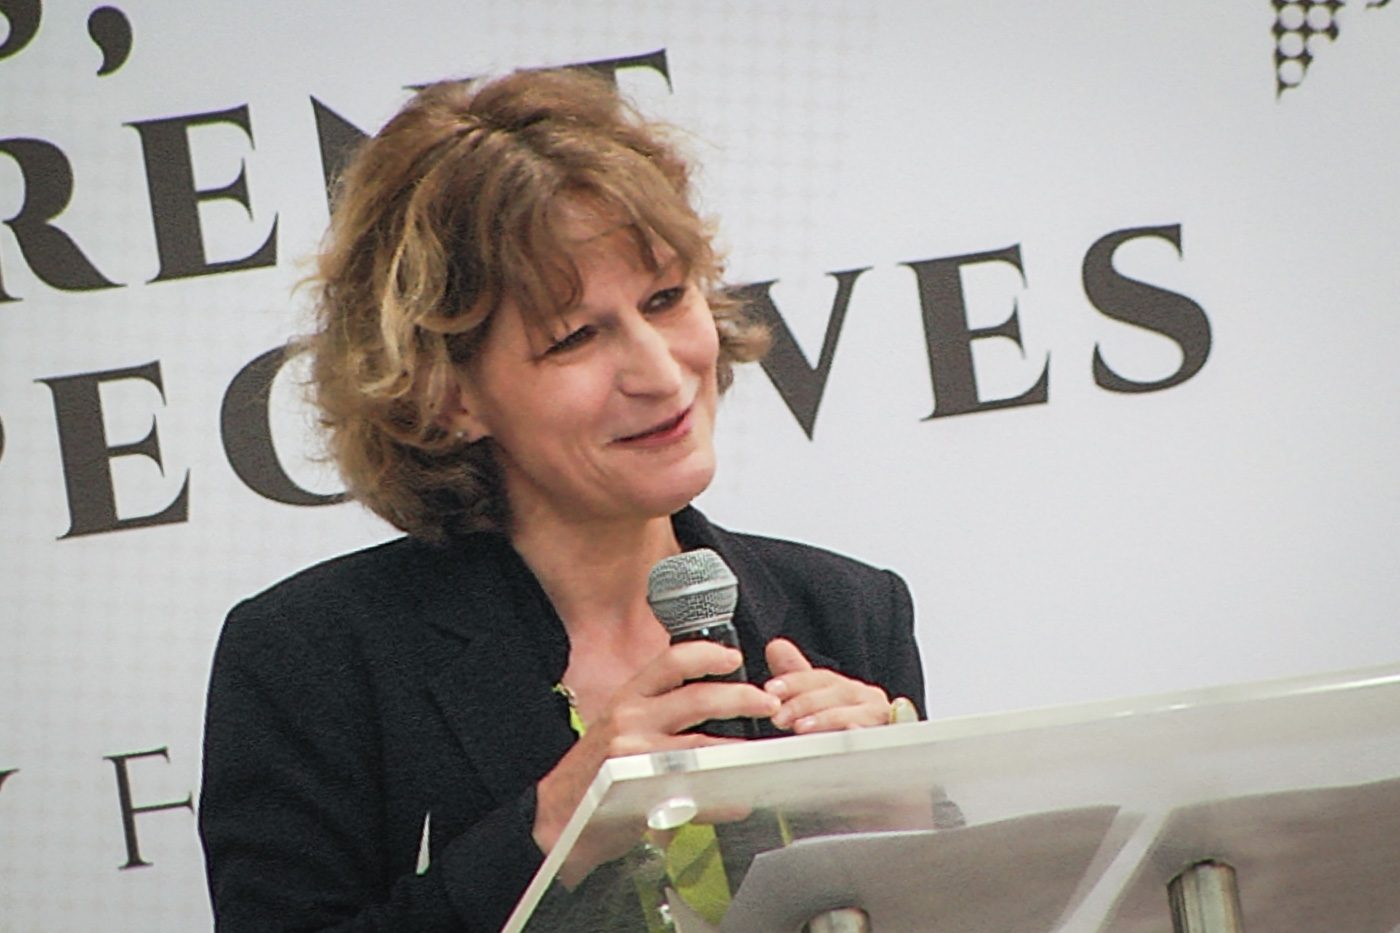 Callamard: I’m waiting for PH to lift conditions of official visit